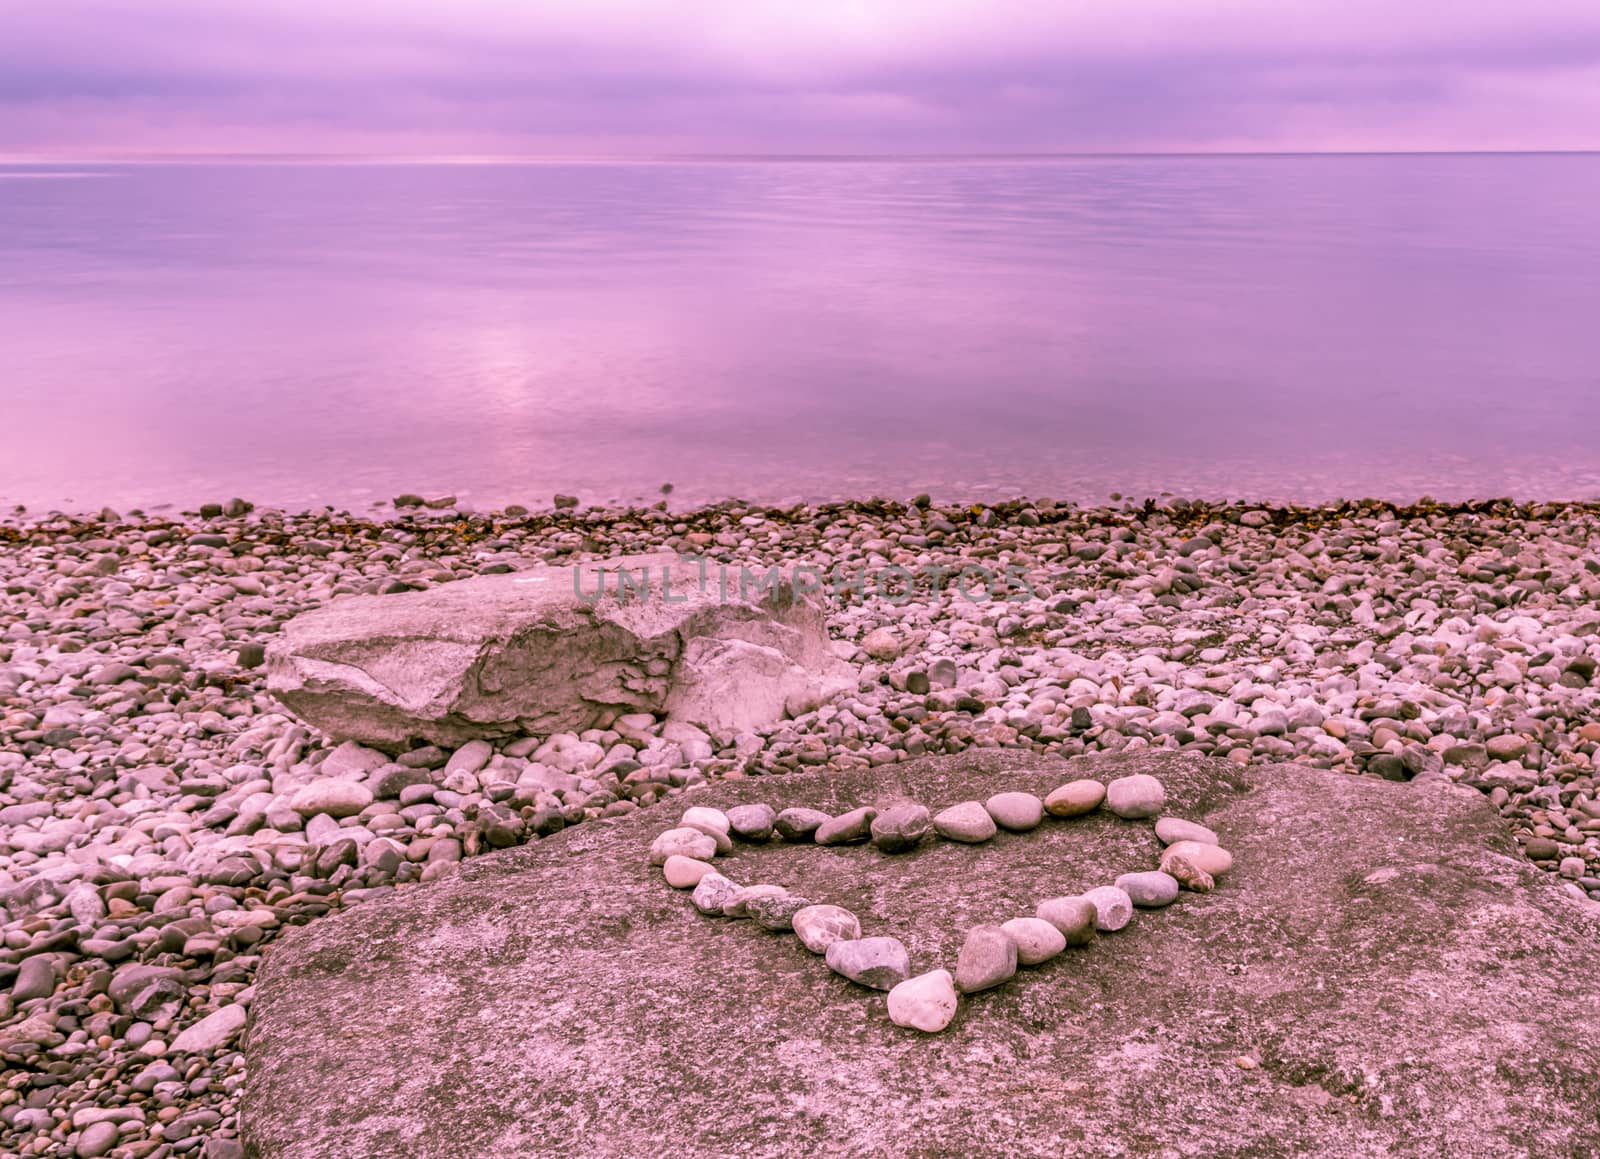 Heart shape made from stones placed on a big rock, near the lake Bodensee under a blue-purple sky, reflected in the water.